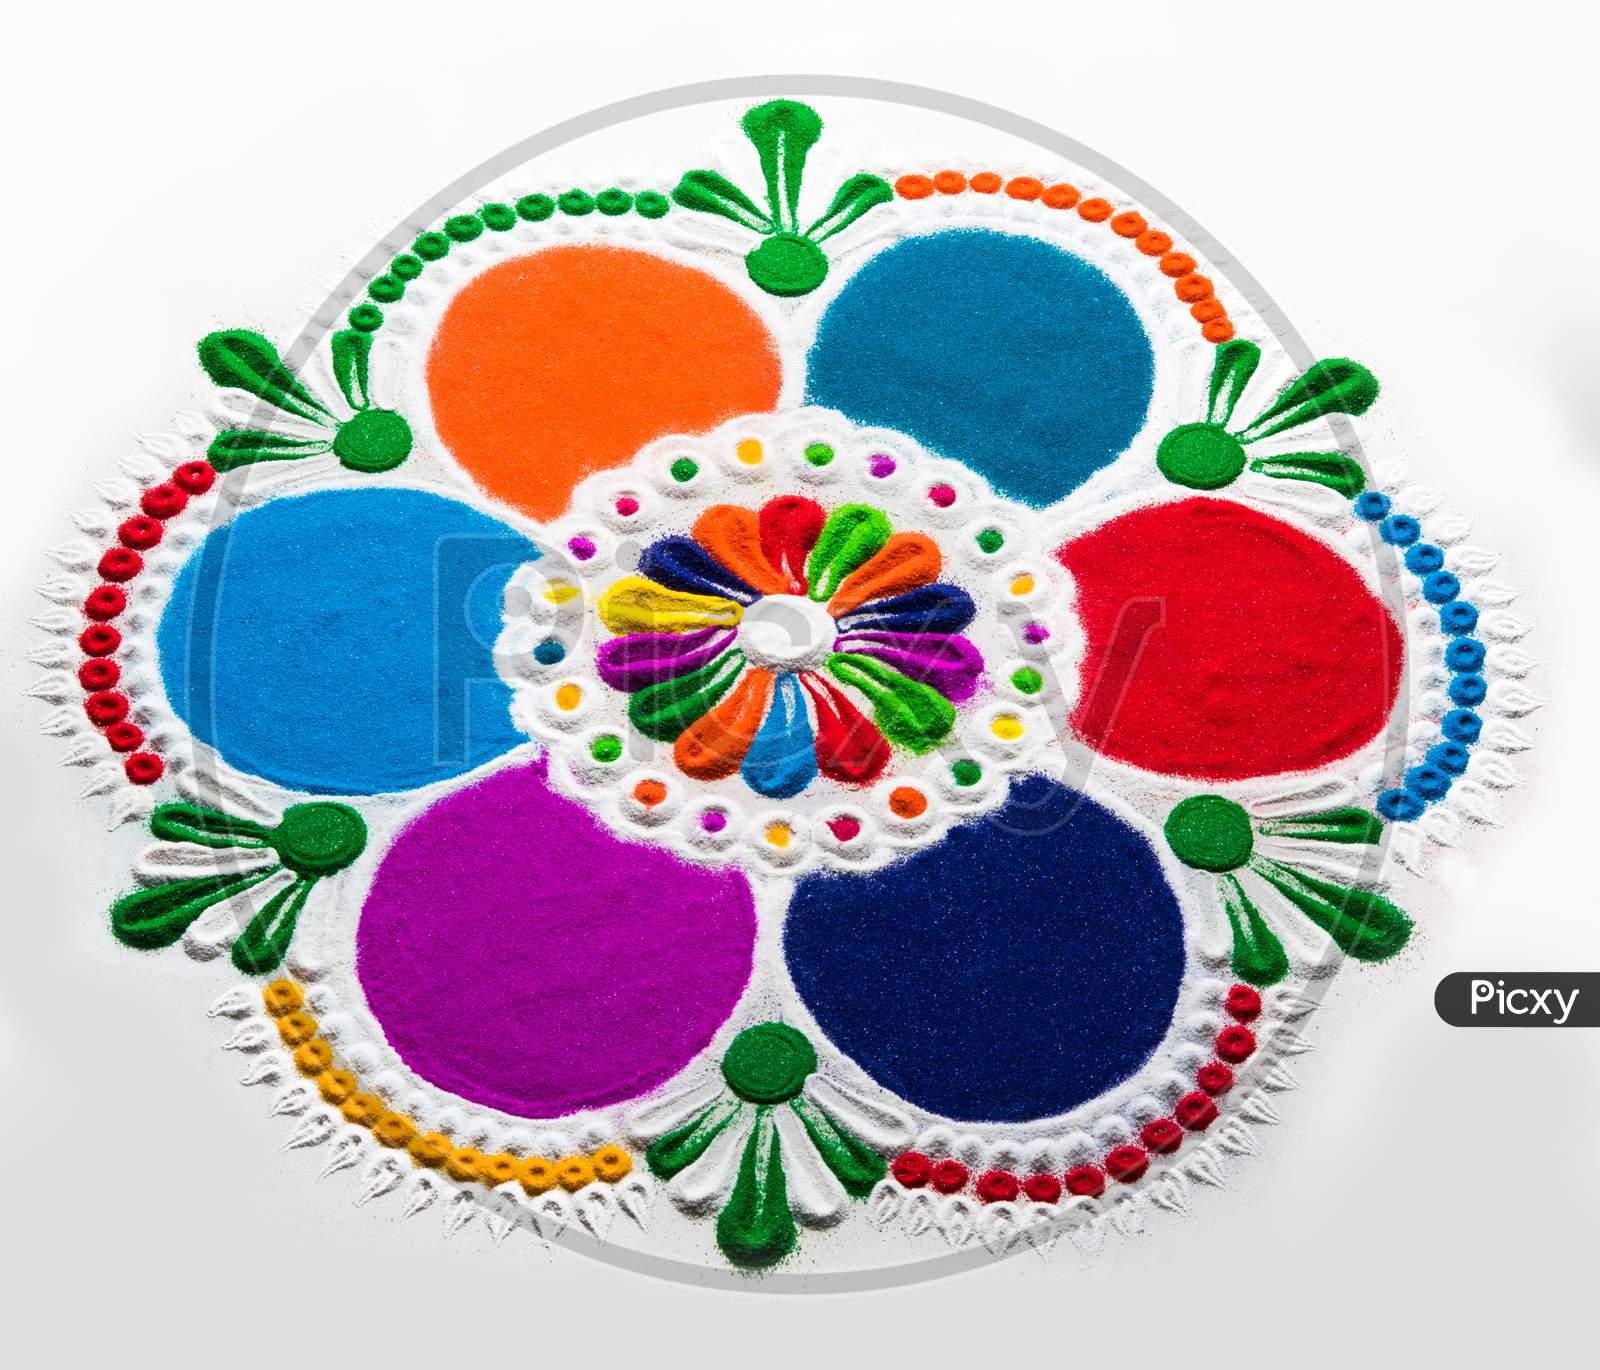 Rangoli Design Made With Colourful Powder For Diwali, Pongal, Onam Festivals In India